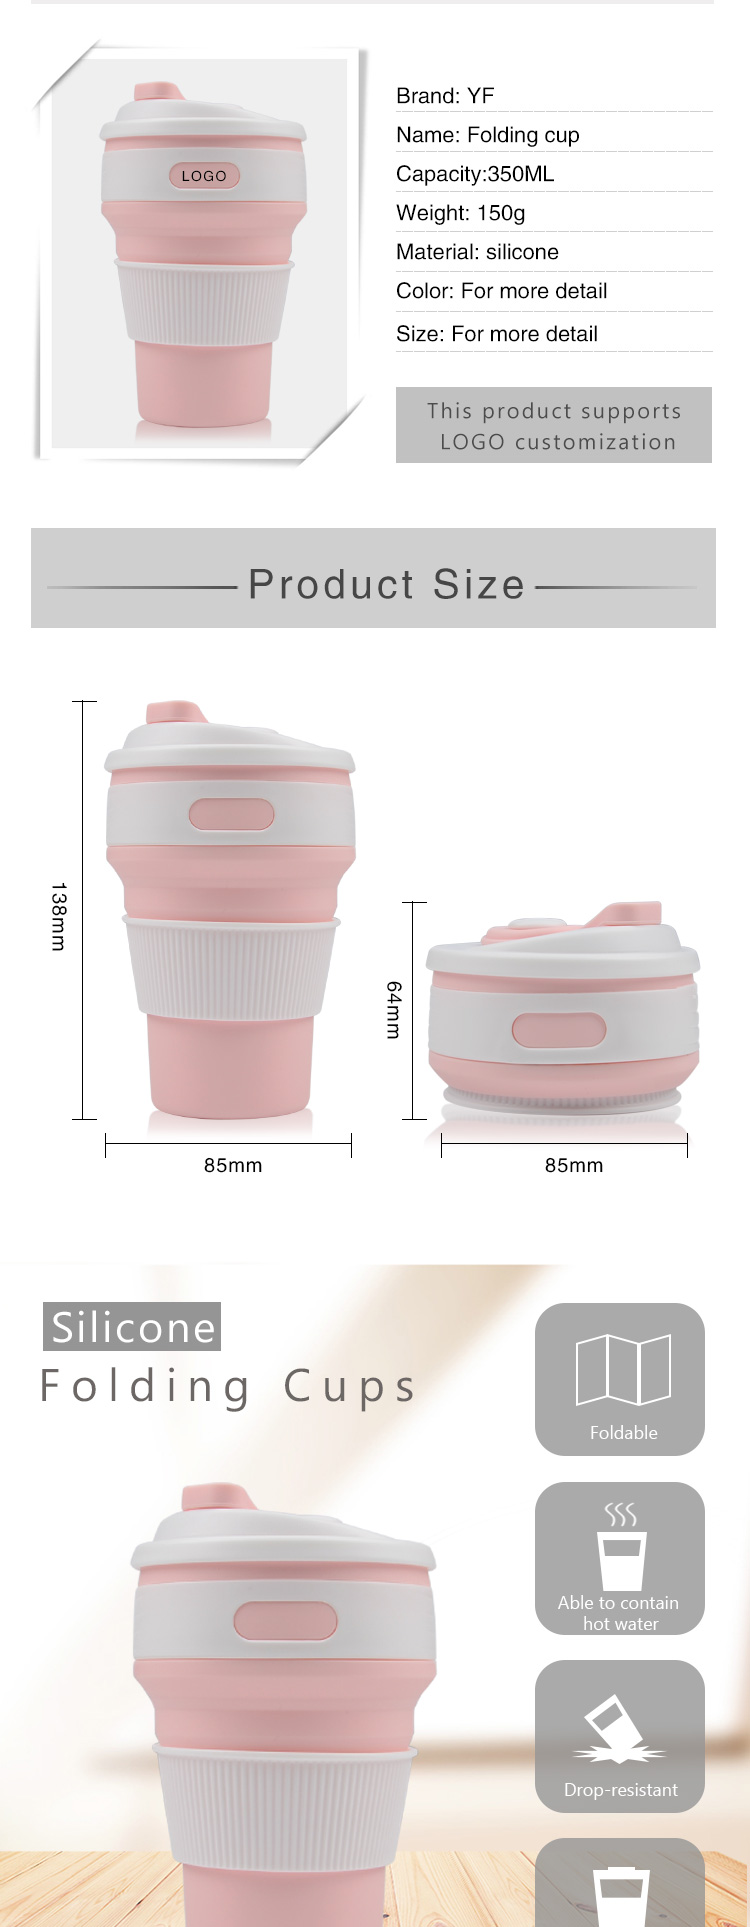 foldable silicone collapsible travel cups 5